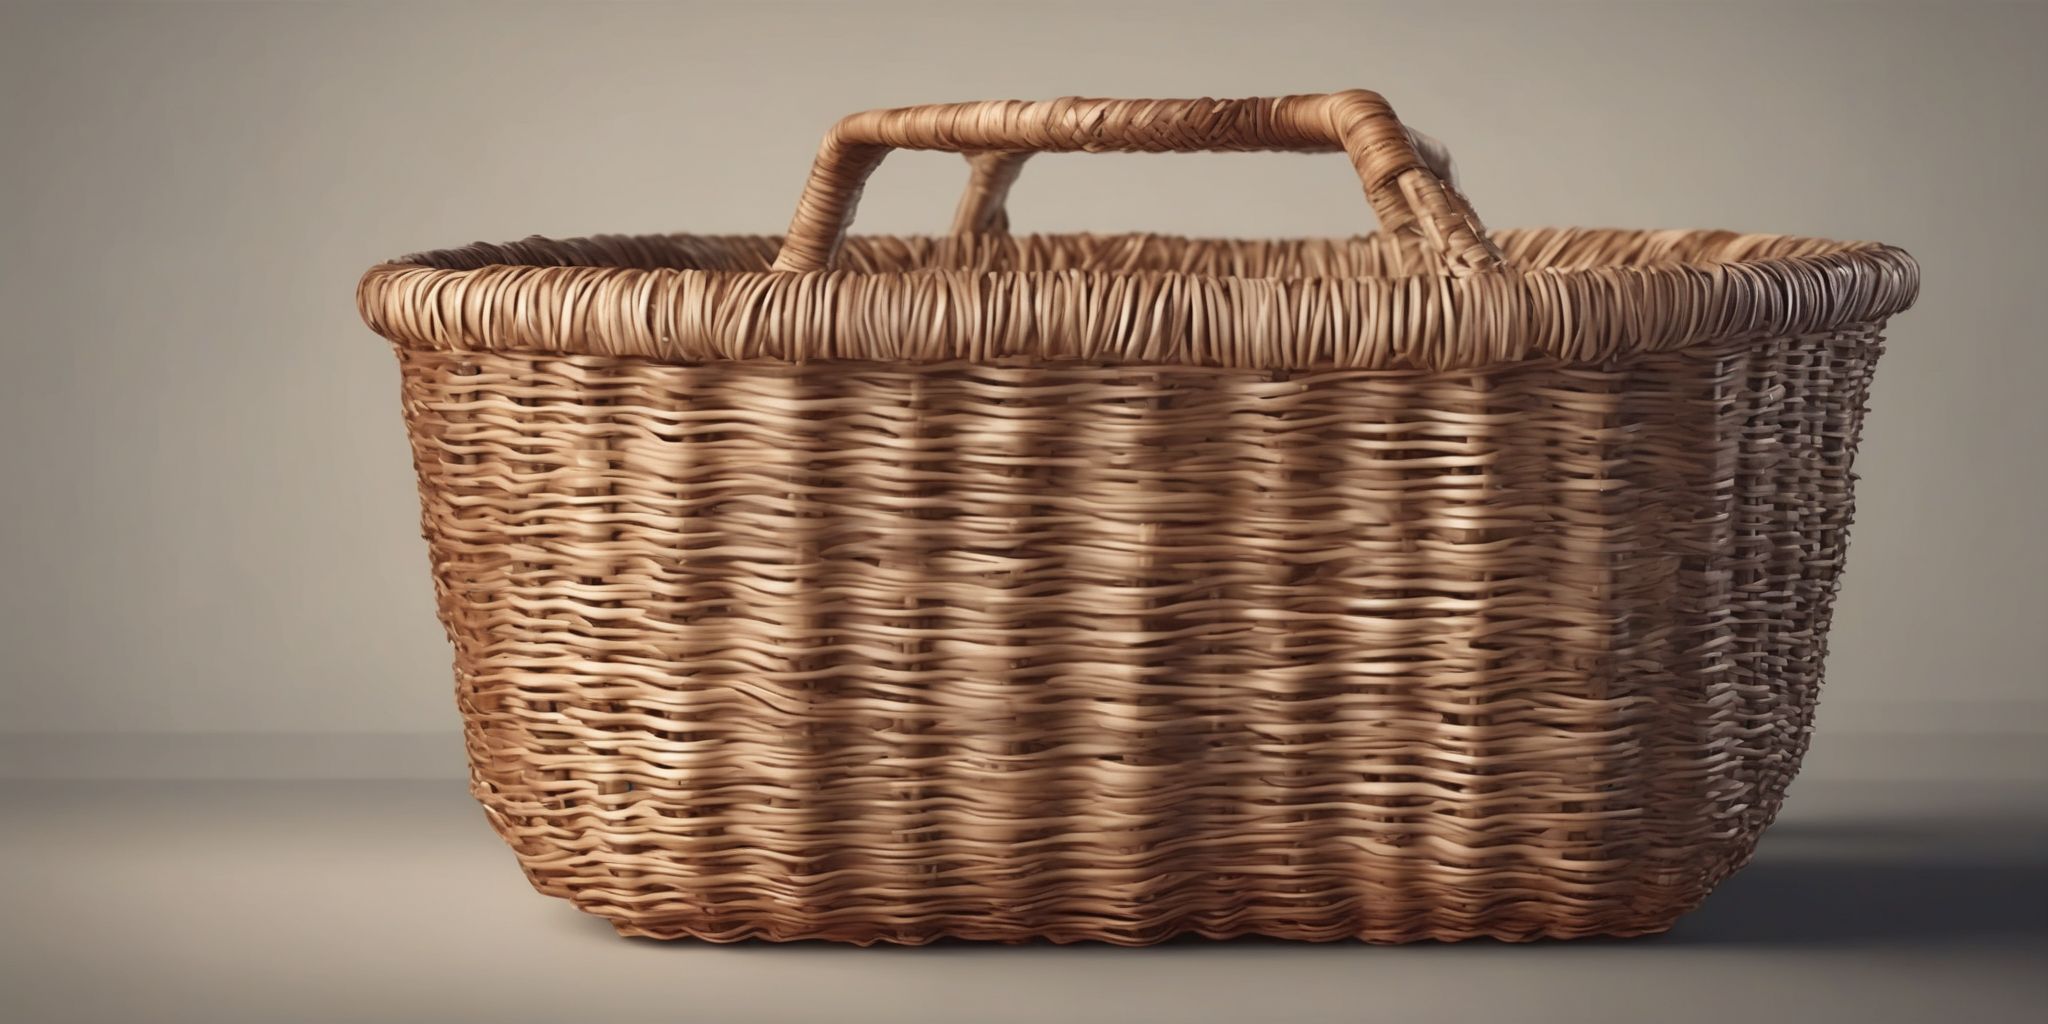 Basket  in realistic, photographic style